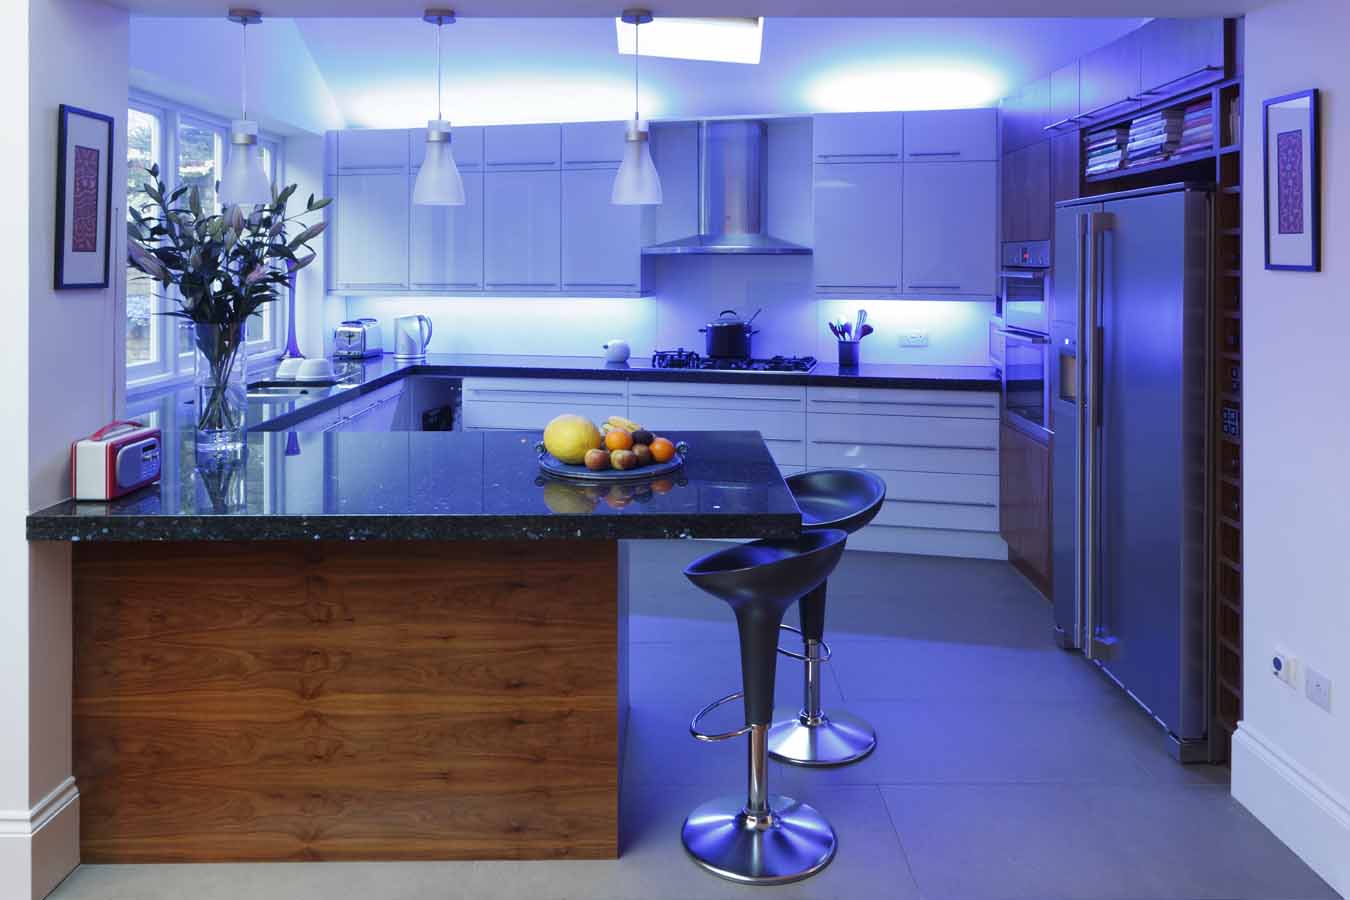 f98dd__Extraordinary-Small-Kitchen-With-Blue-LED-Lighting LEDs 10 uses in Architecture